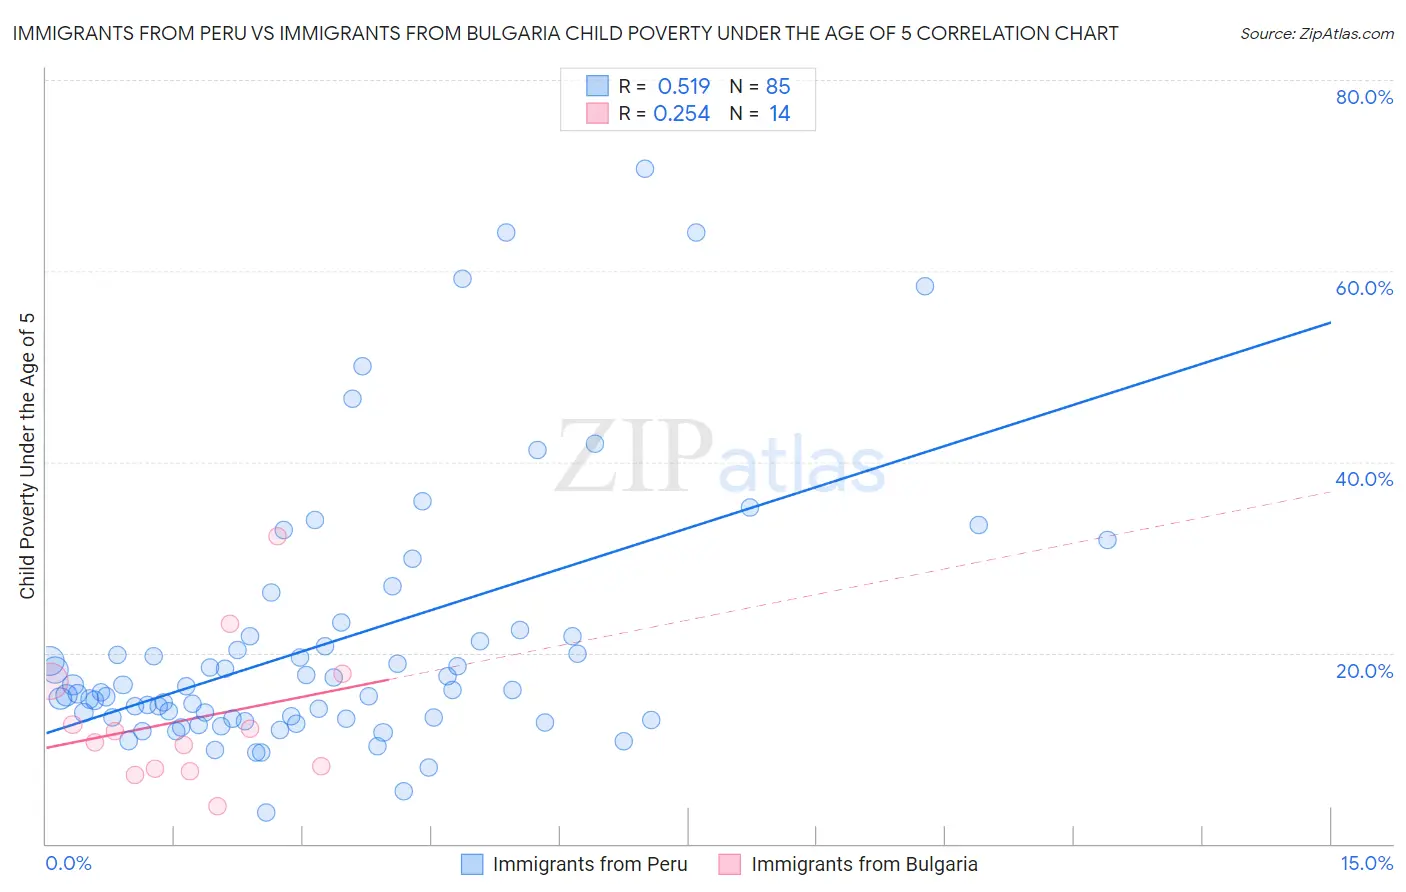 Immigrants from Peru vs Immigrants from Bulgaria Child Poverty Under the Age of 5